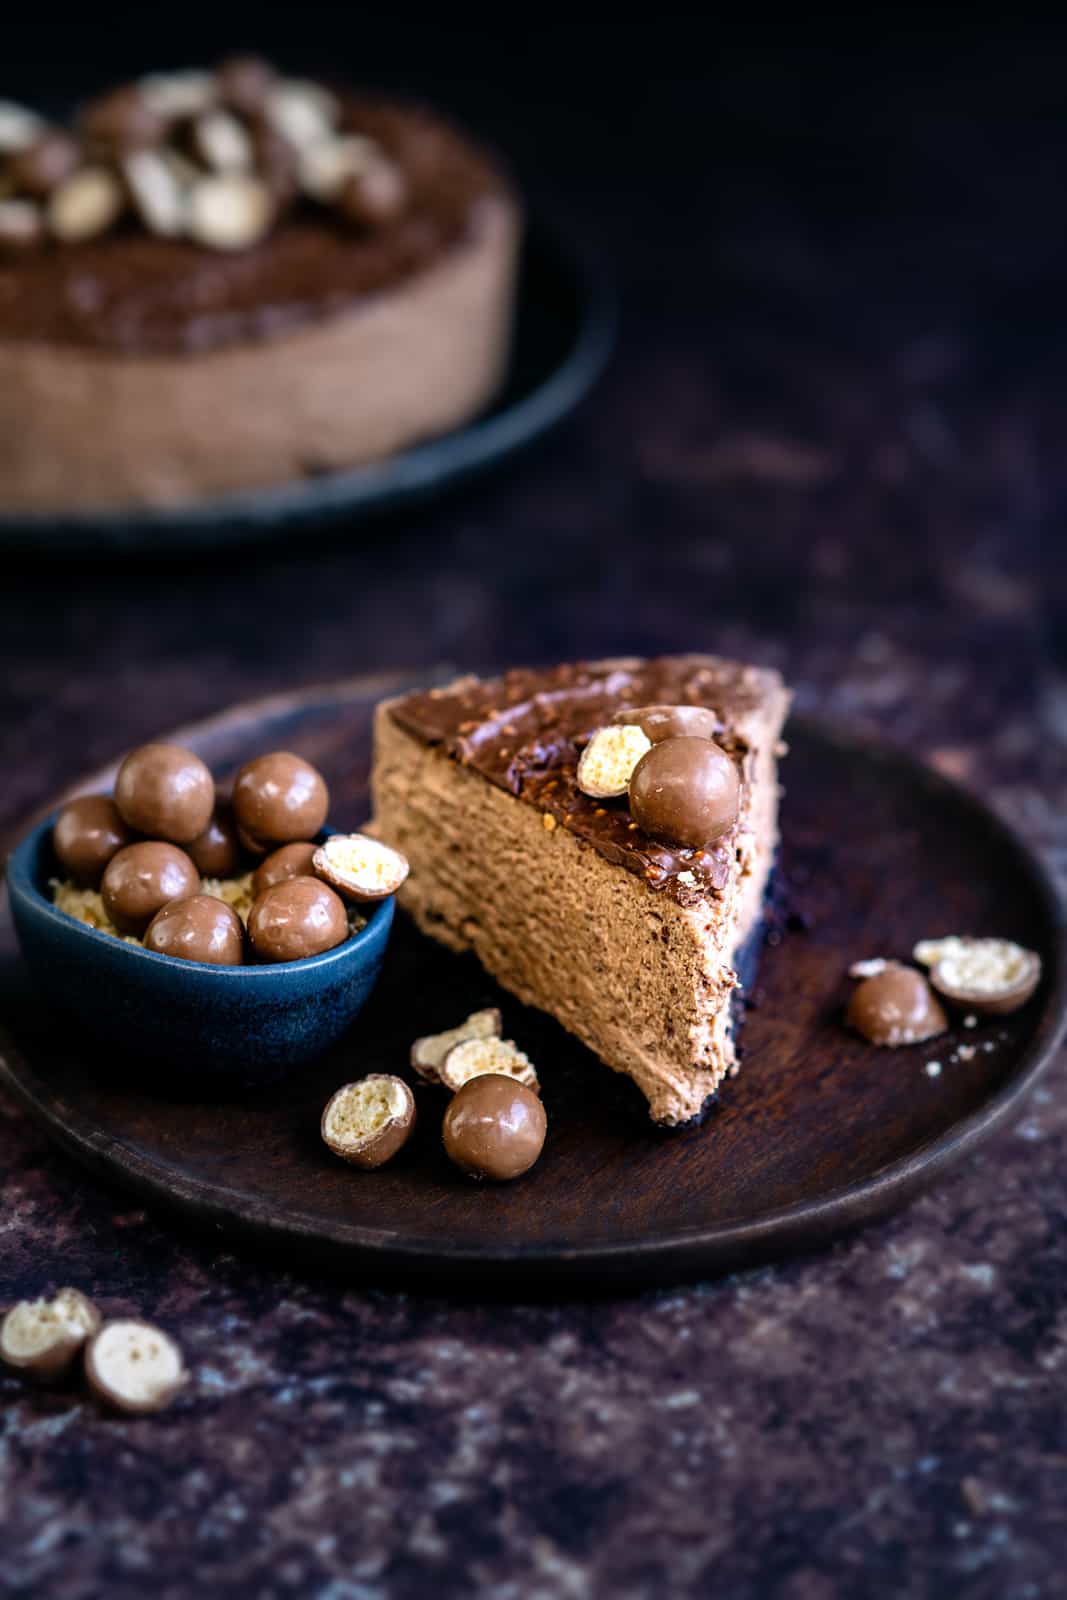 Slice of Malteser cheesecake on wood plate with Malteses on the side